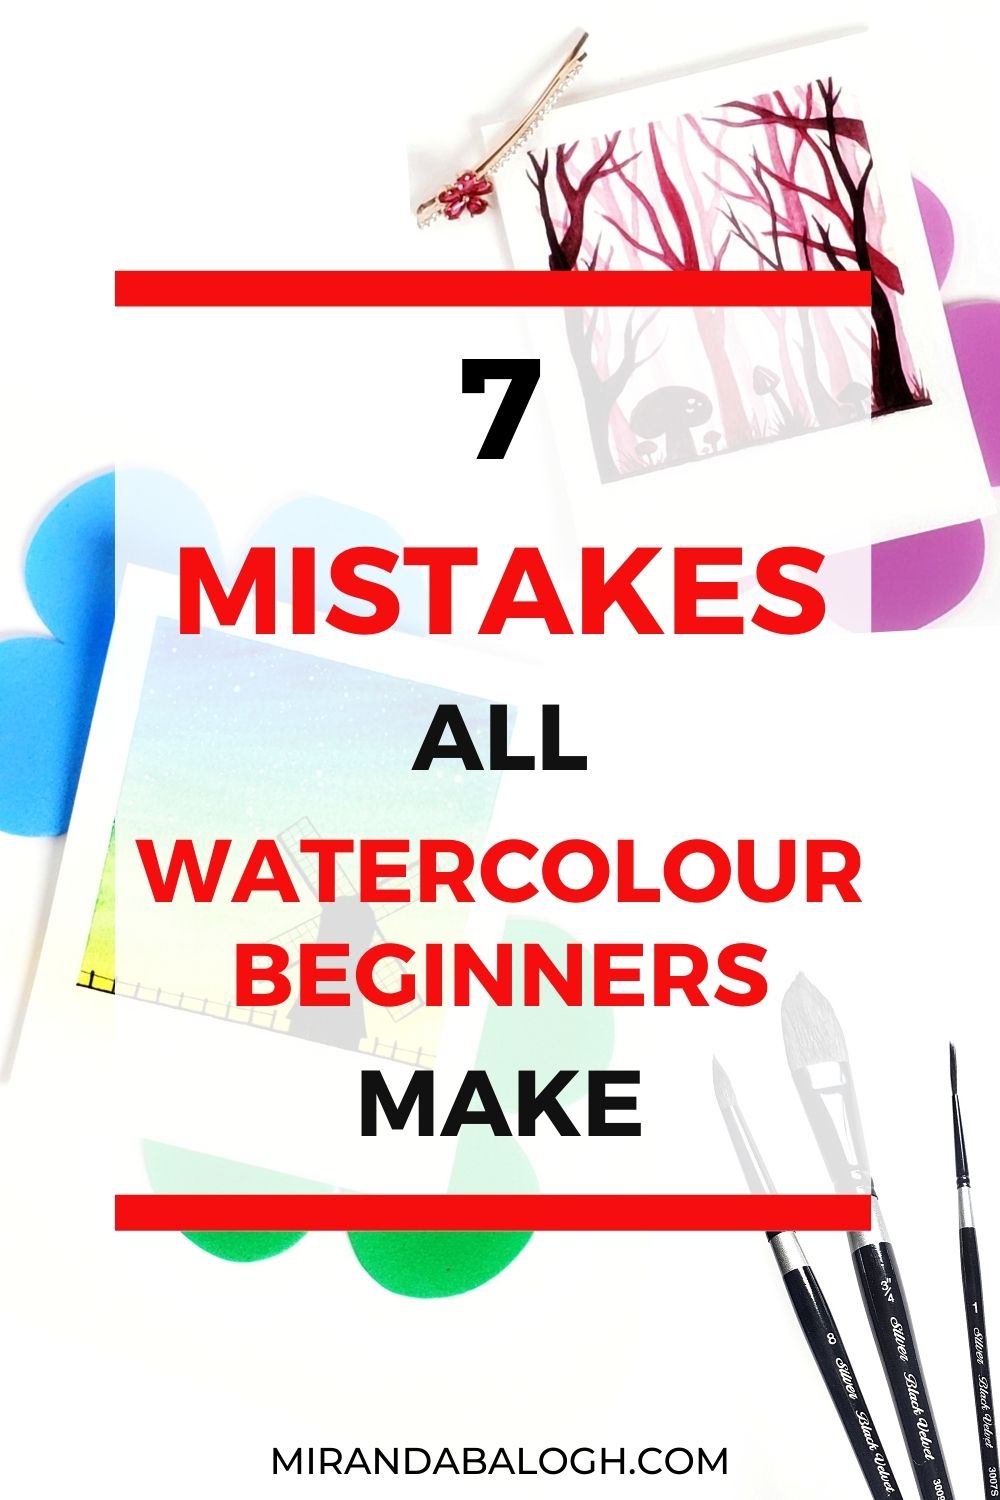 Need watercolour painting tips for beginners? Then click here to learn how to avoid common mistakes and use best practices when creating watercolour art for beginners. Watercolour painting for beginners can be easy if you know the best painting techniques, so click here to download a free watercolour guide to help you paint more skillfully. Improve your art education today!